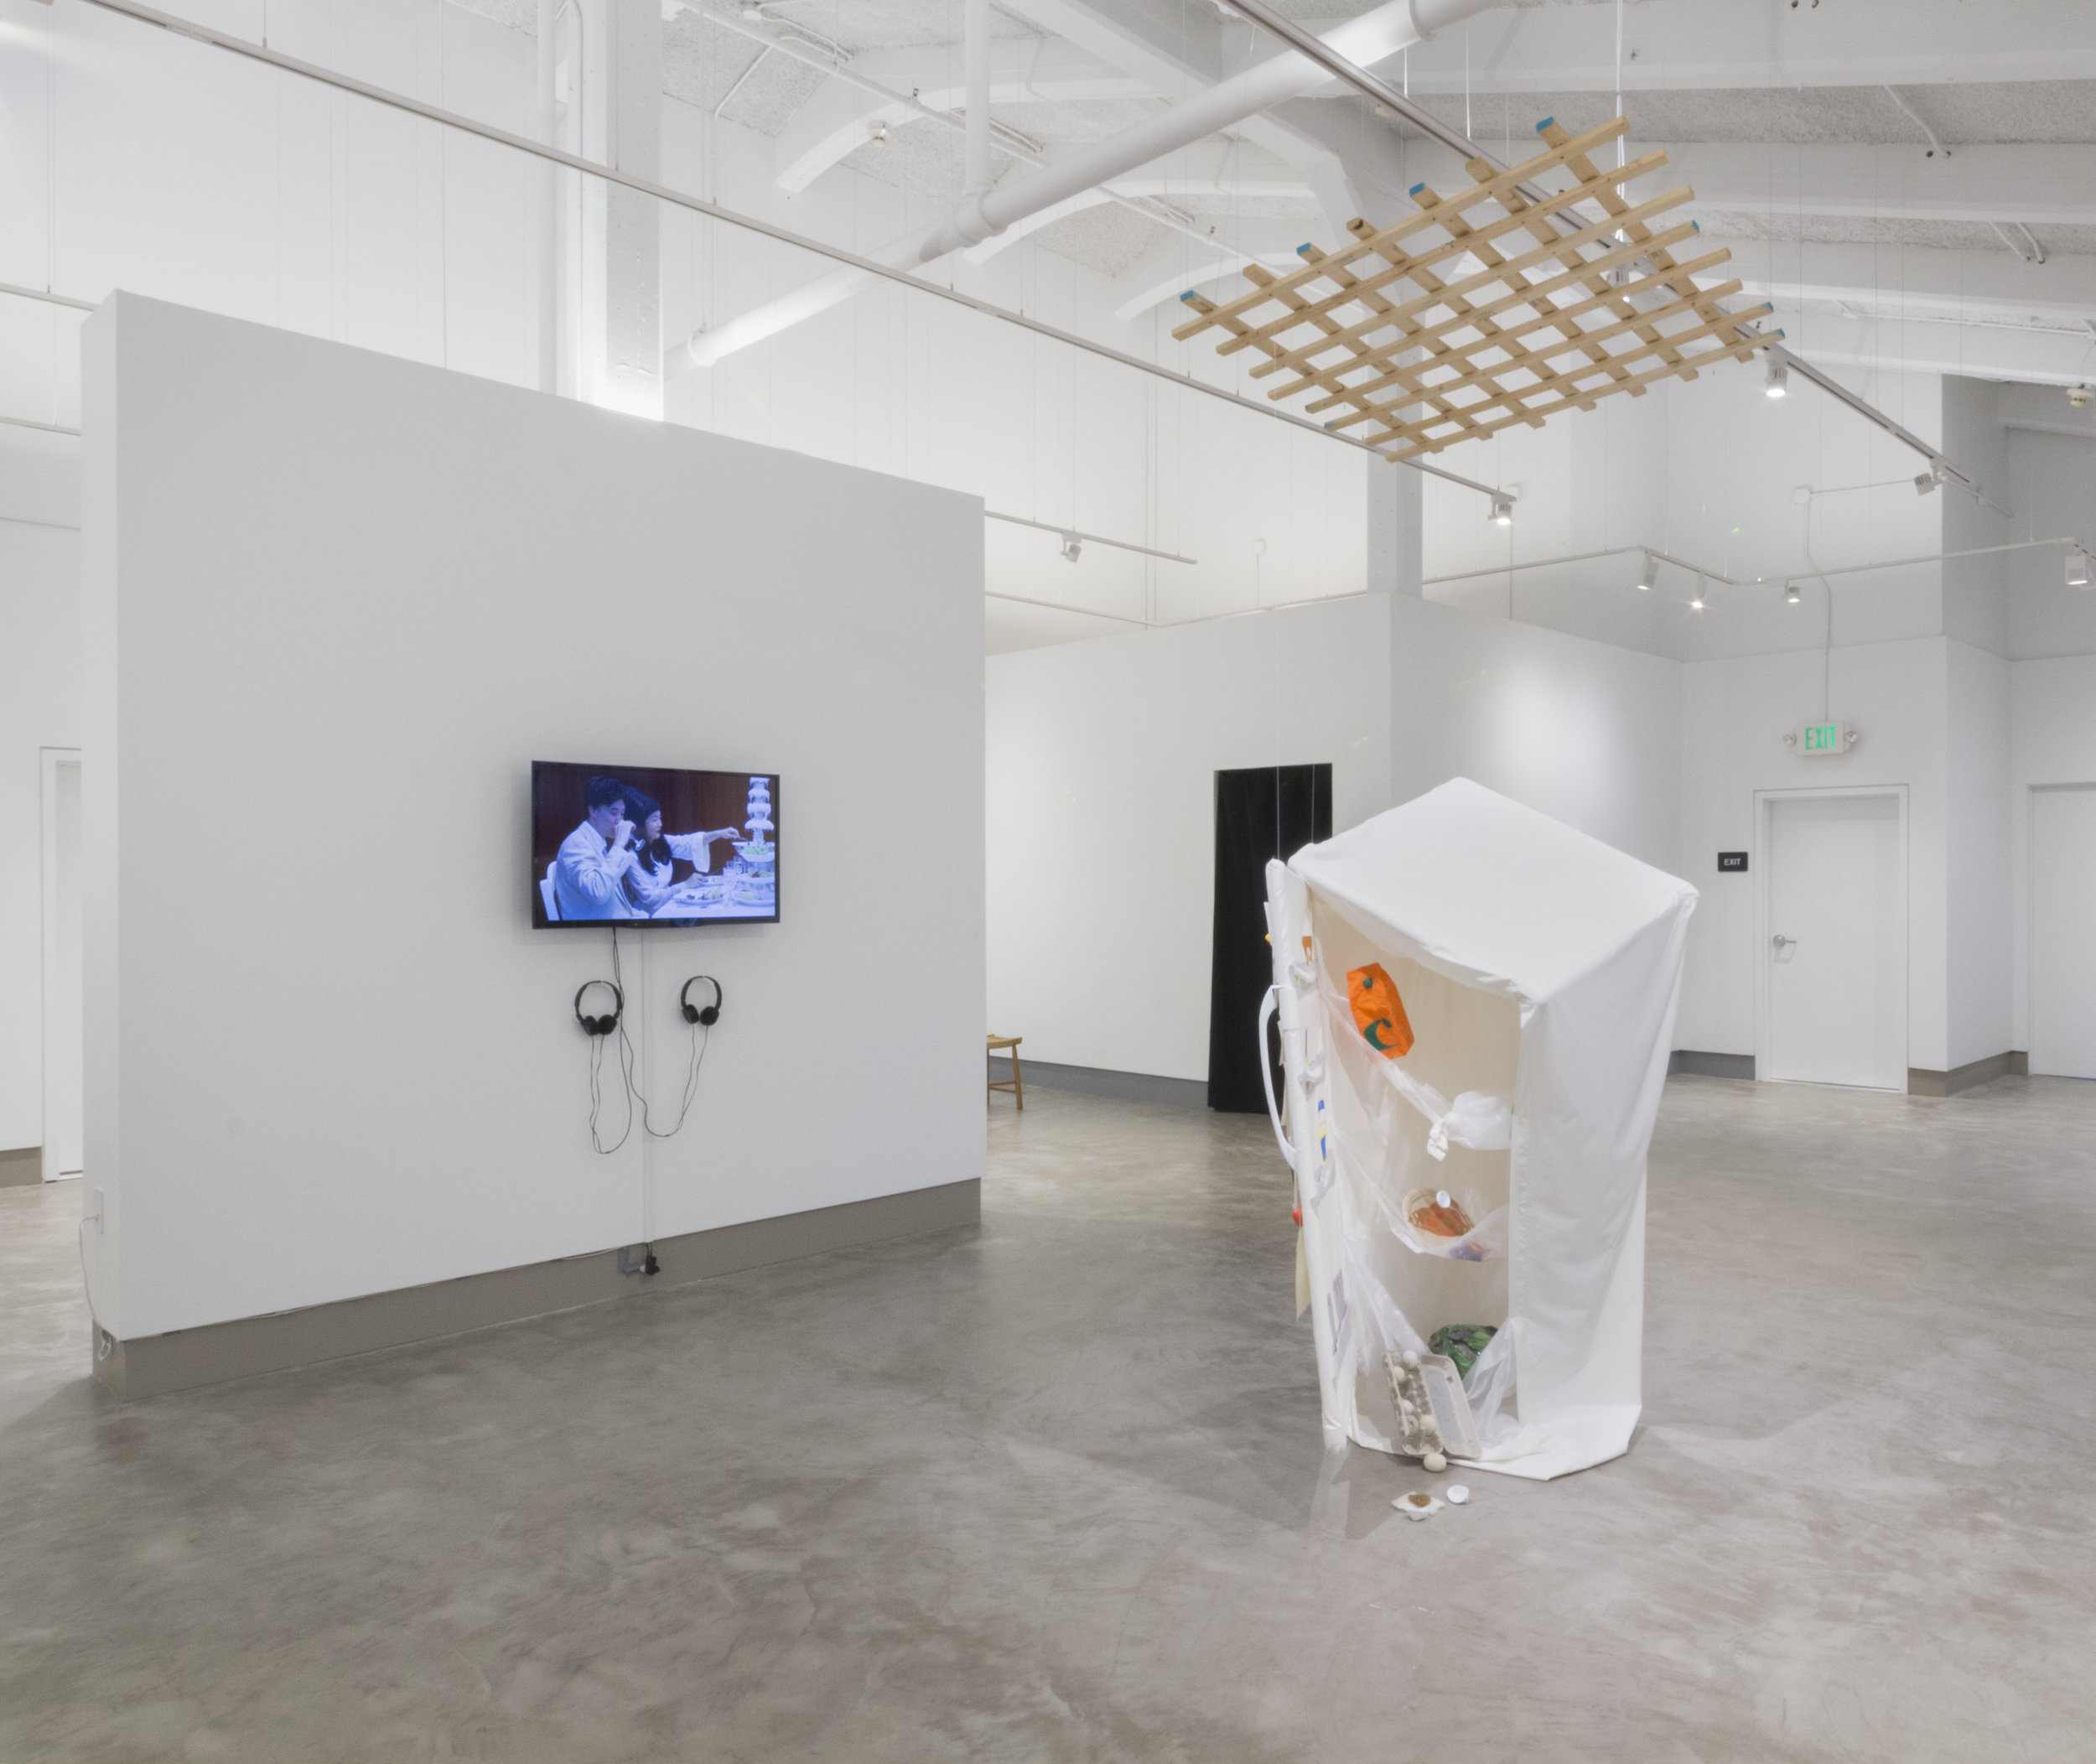 “Purging” (Exhibition view at Embark Gallery, San Francisco, CA), 2016, Screen-printed fabric, cardboard, milk jug, clay, felted wool, ink thread, pvc, monofilament, fridge light, Dimensions variable